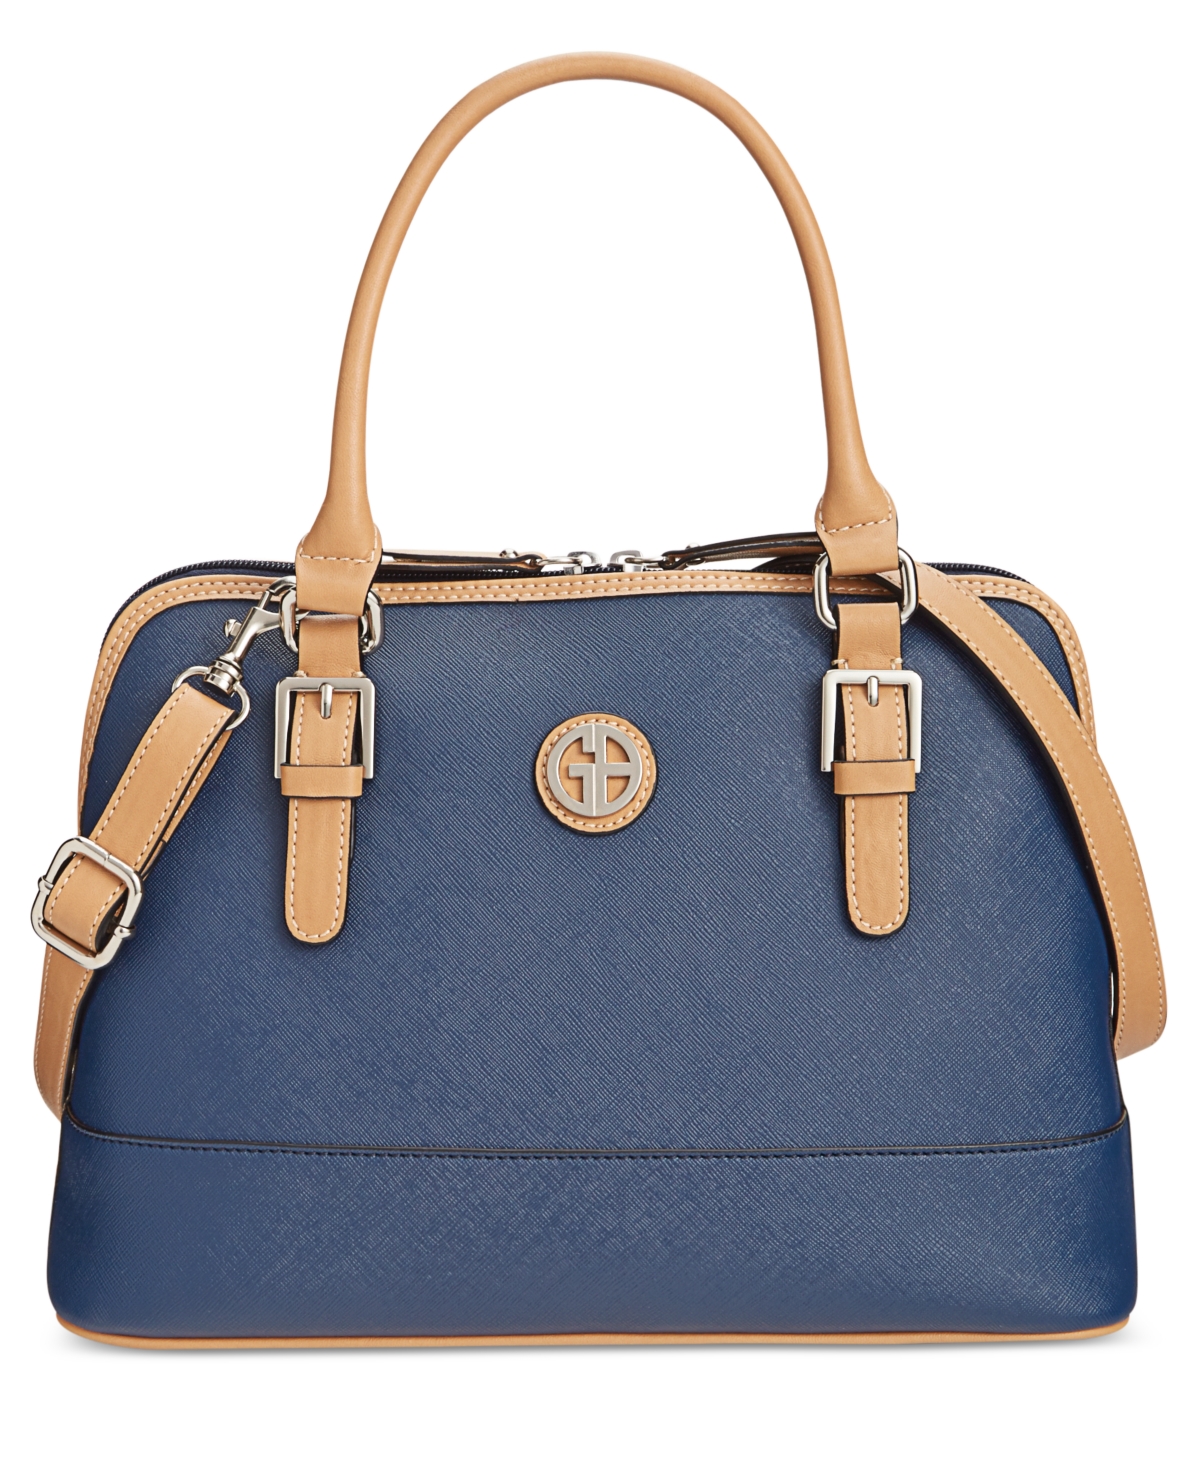 Saffiano Dome Satchel, Created for Macy's - Navy